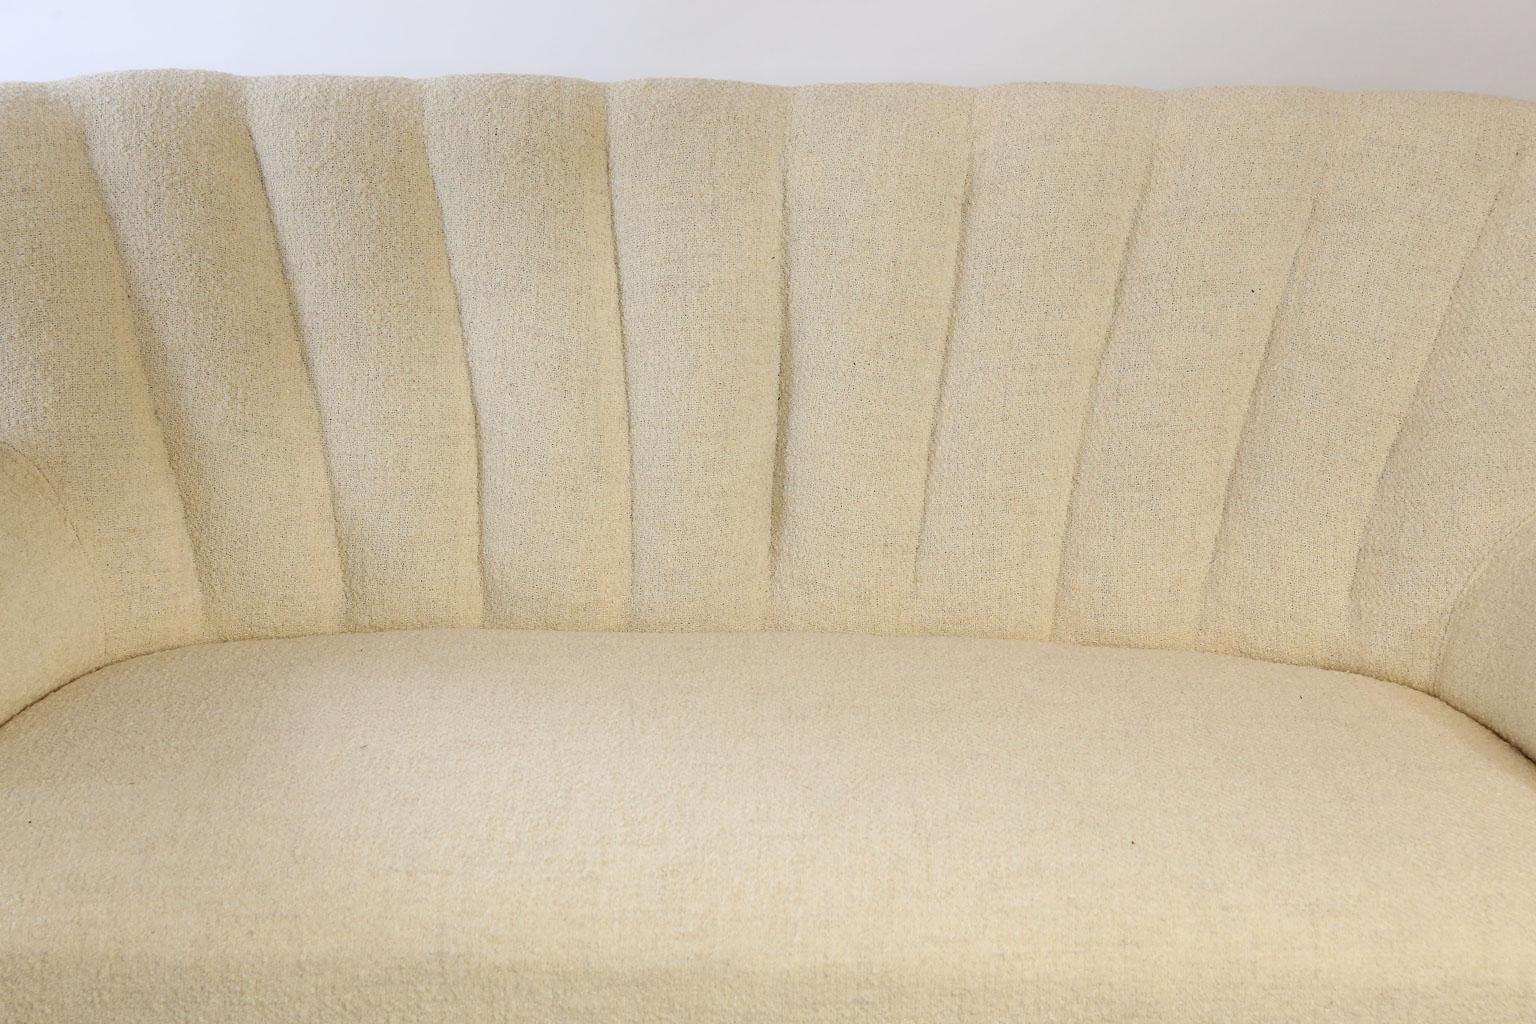 Found in Paris, this midcentury settee is presented in a beautiful cream upholstery. Designed with clean lines and a tufted back this settee will add a touch of modern to your home.